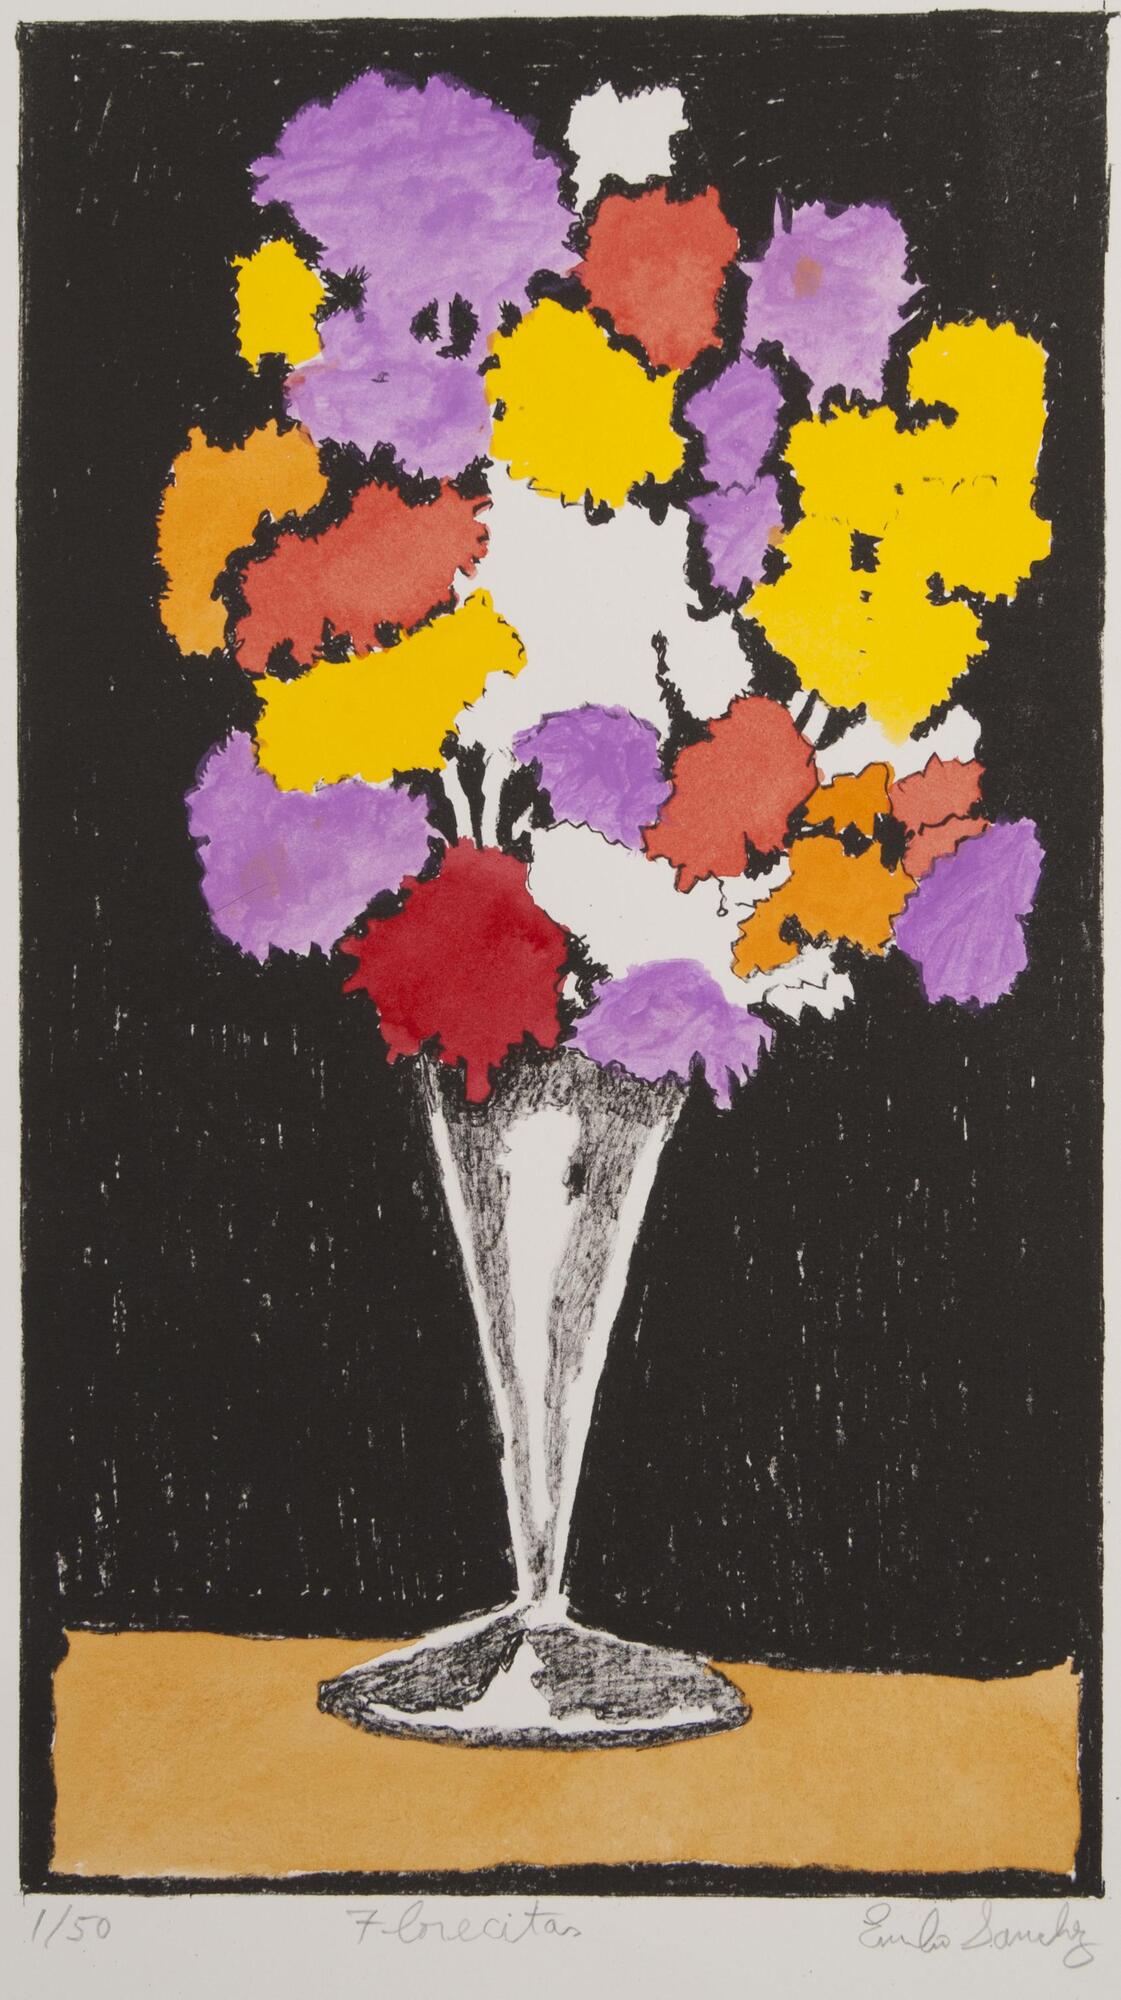 A color print of flowers in a silver vase. The flowers are bright shades of purple, red, orange, and gold.